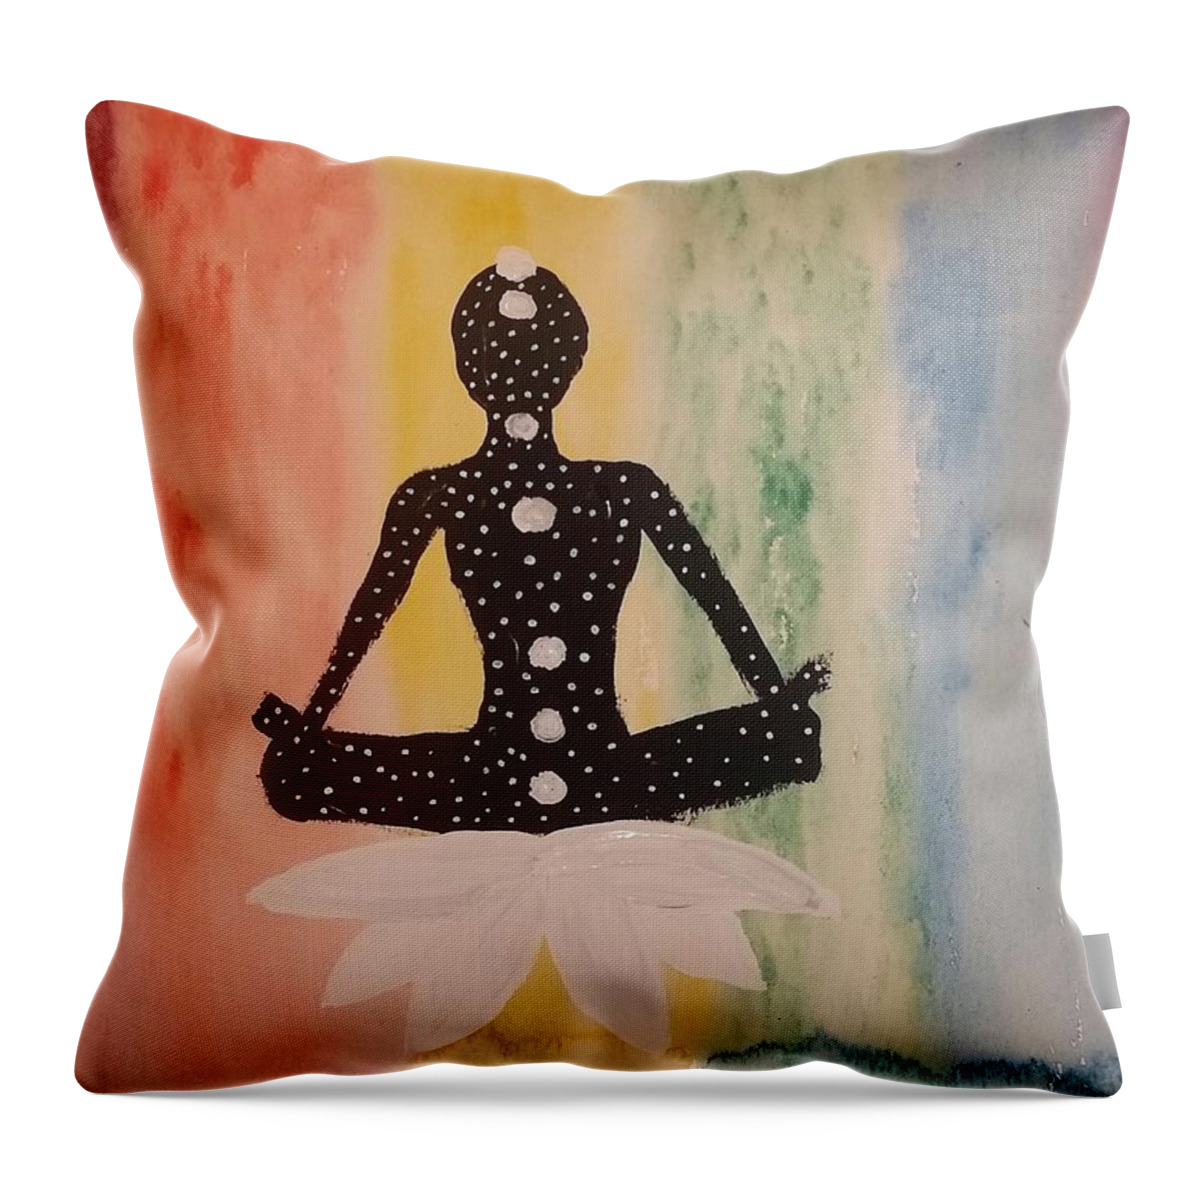 Meditation Throw Pillow featuring the painting Celestial Meditation by Vale Anoa'i